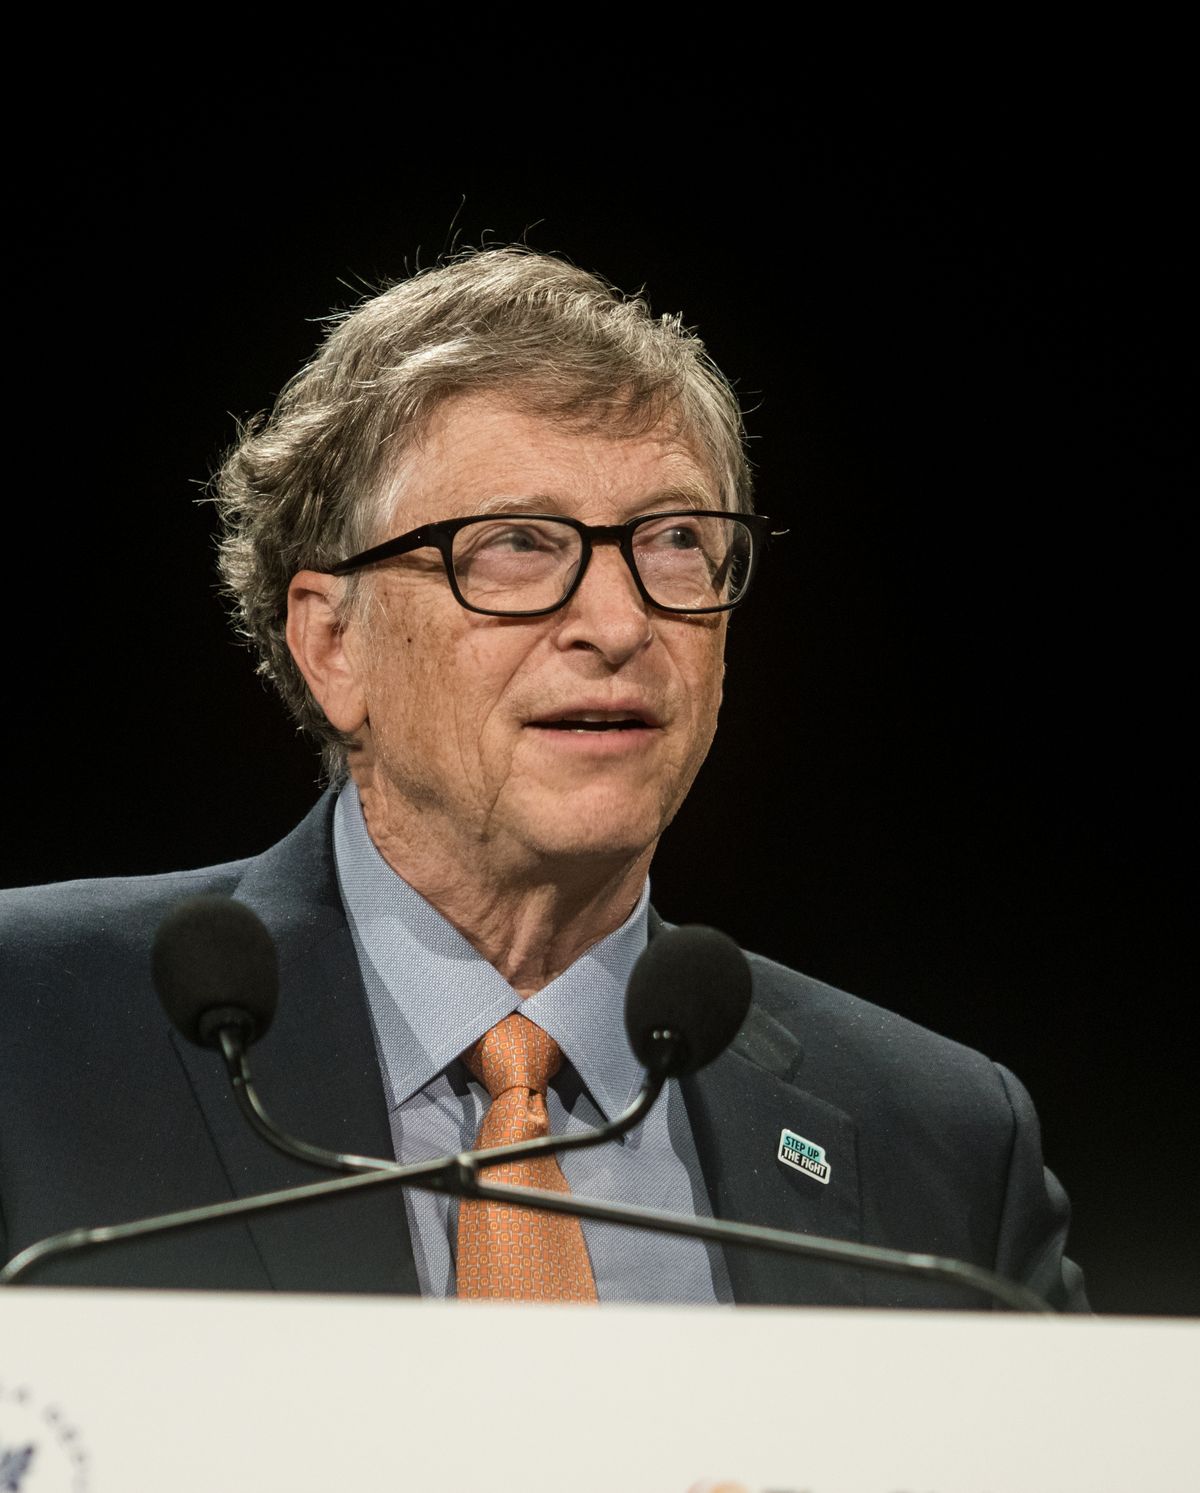 Bill Gates Delivers A Speech At The Fundraising Day At The Sixth World Fund Conference In Lyon